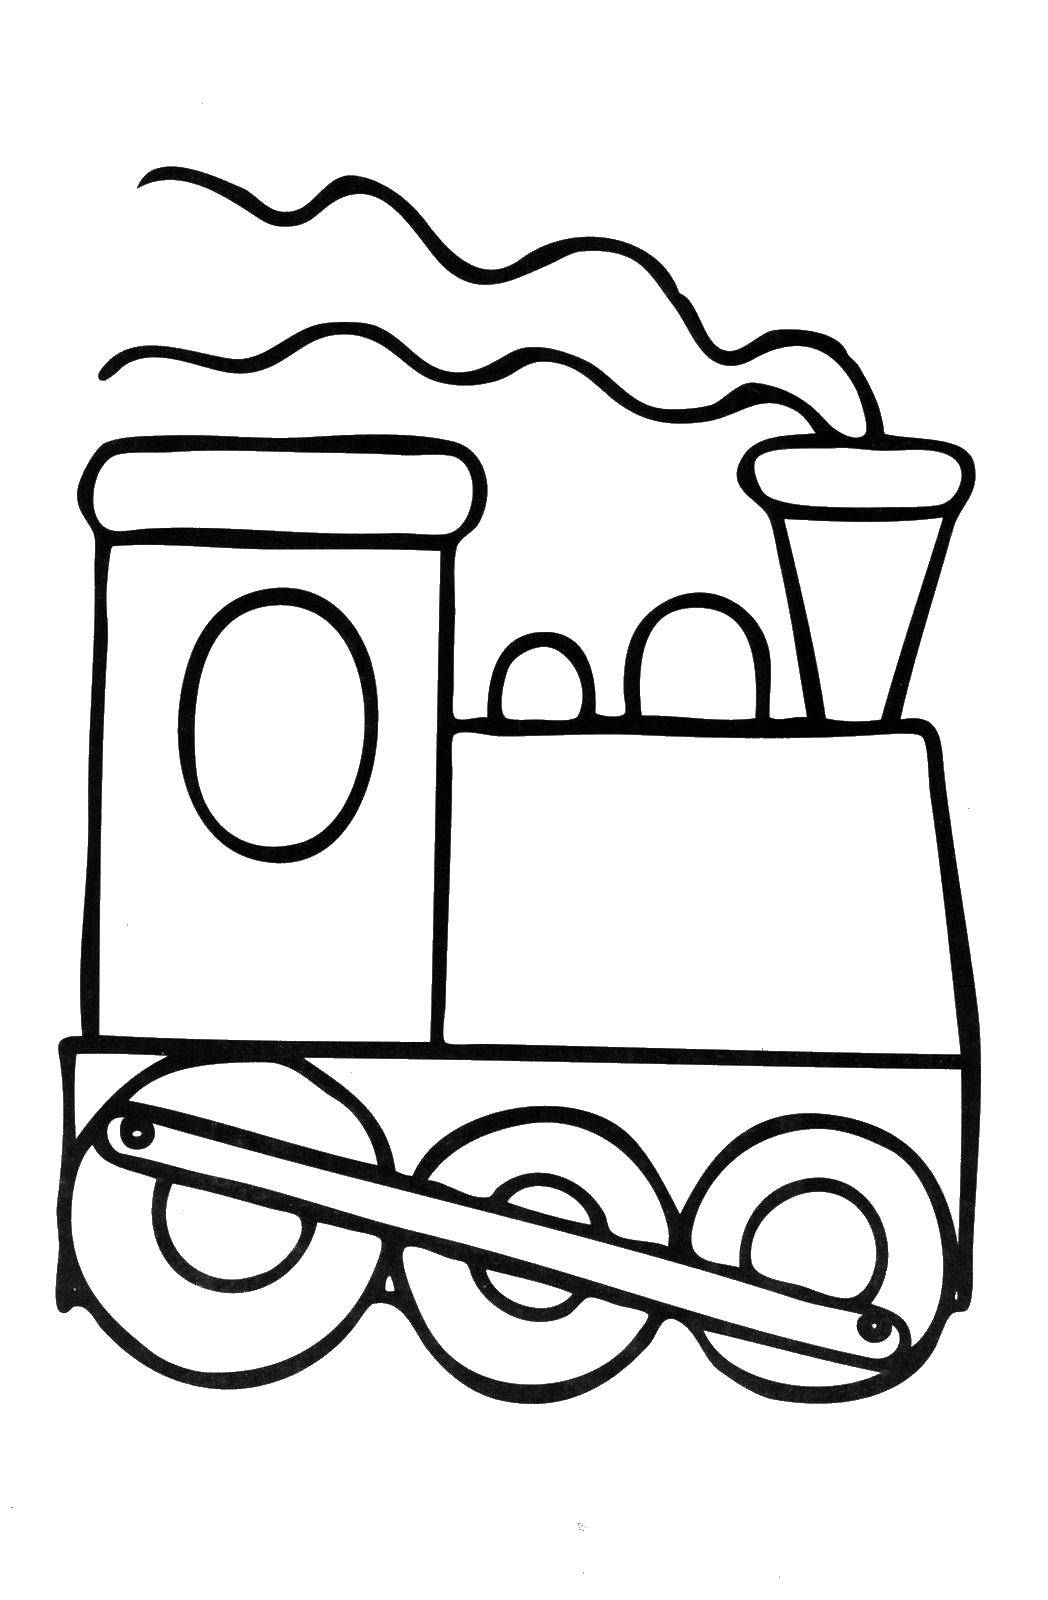 Coloring Parvosol. Category toys. Tags:  toys, train, kids.